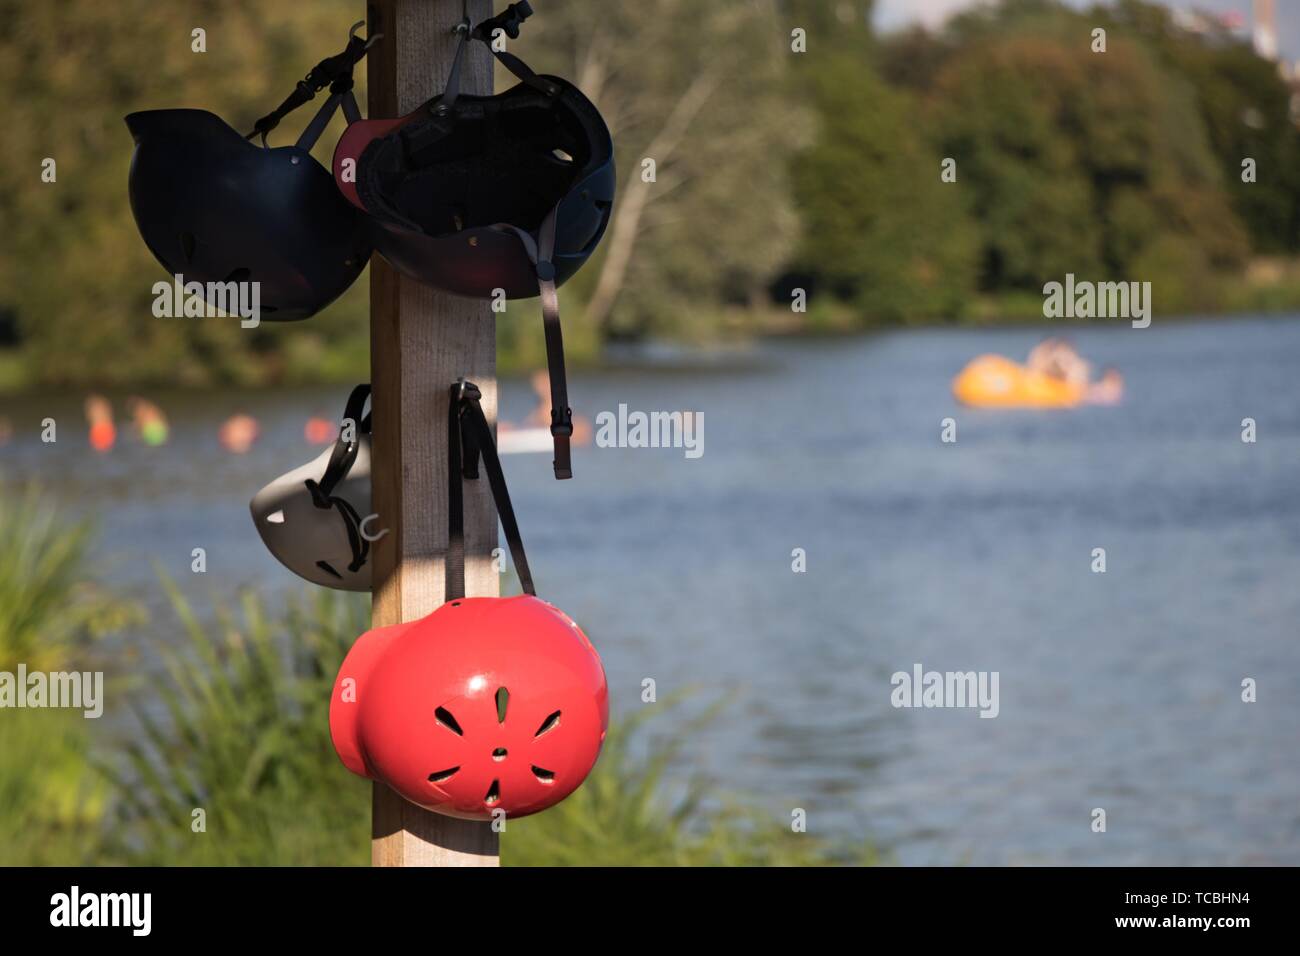 Wakeboard helmets hanging on a pole near the lake. Stock Photo